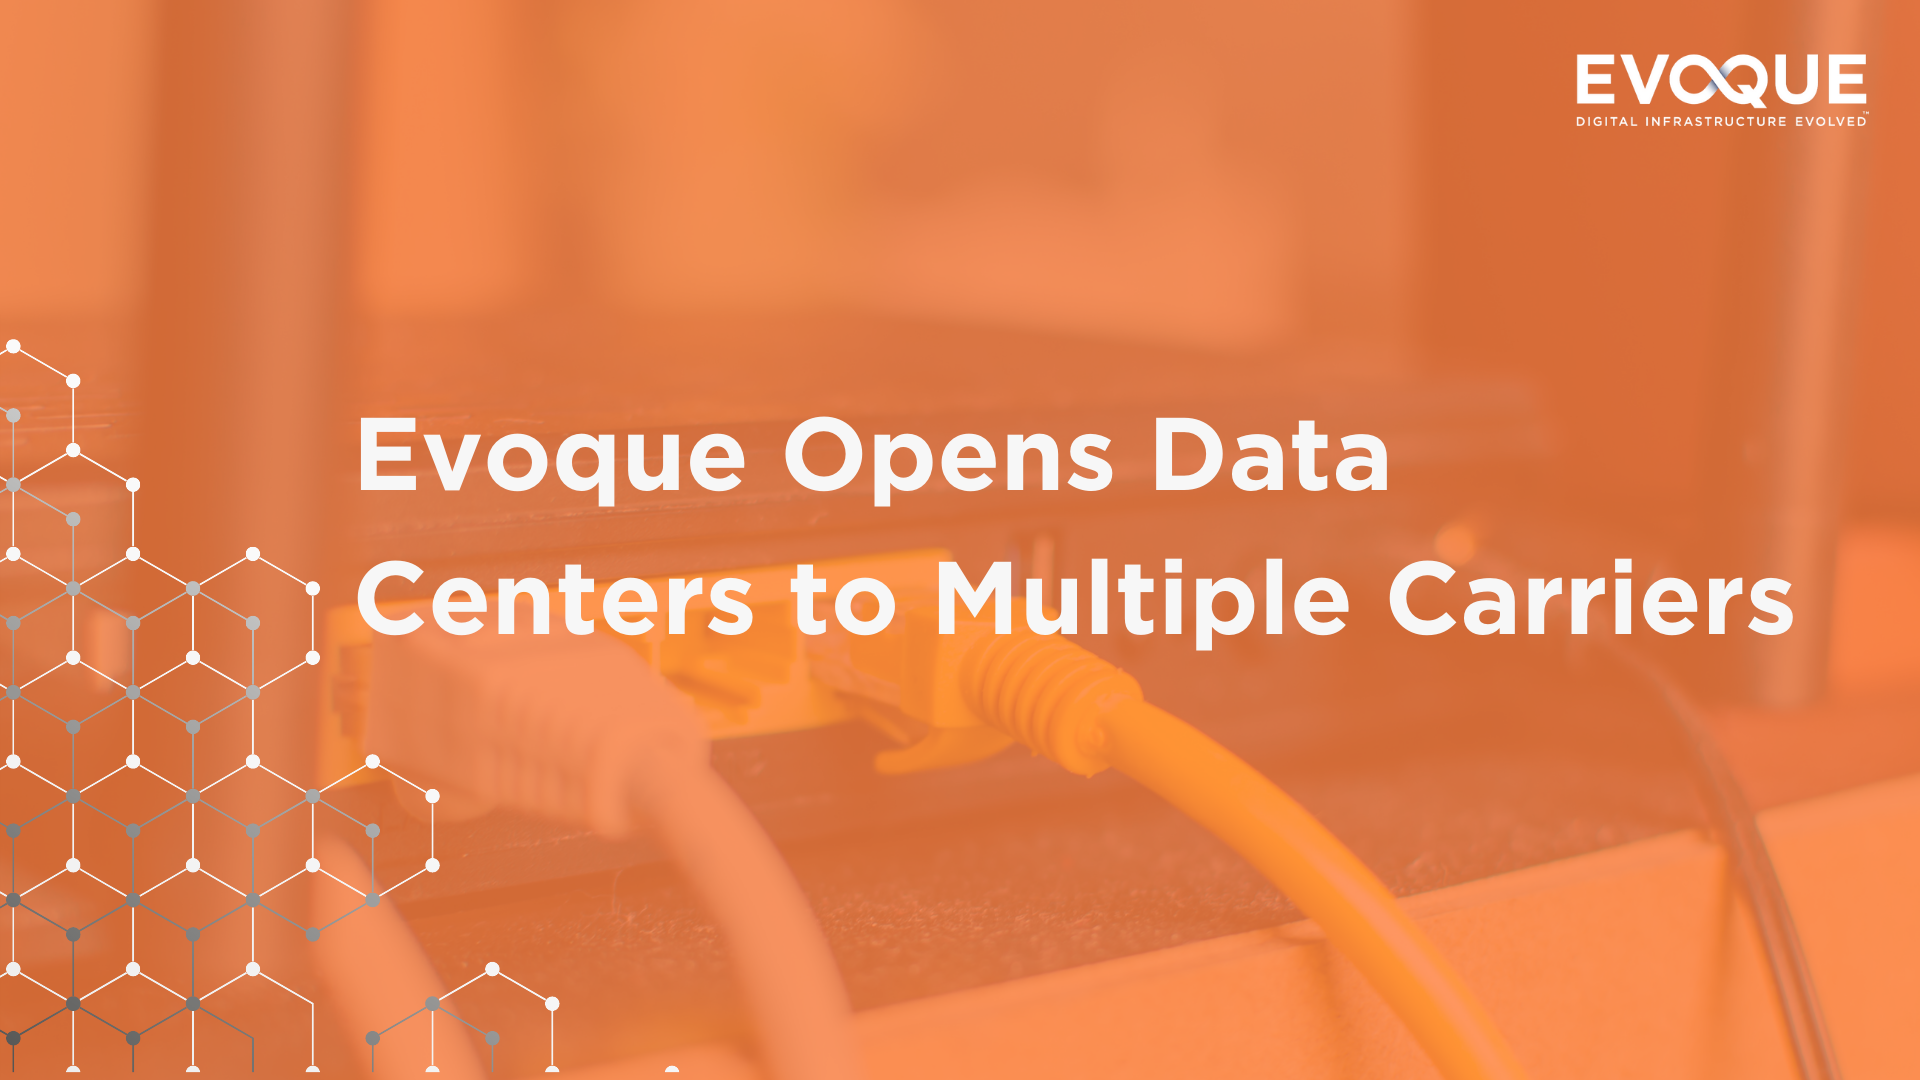 Evoque Opens Data Centers to Multiple Carriers